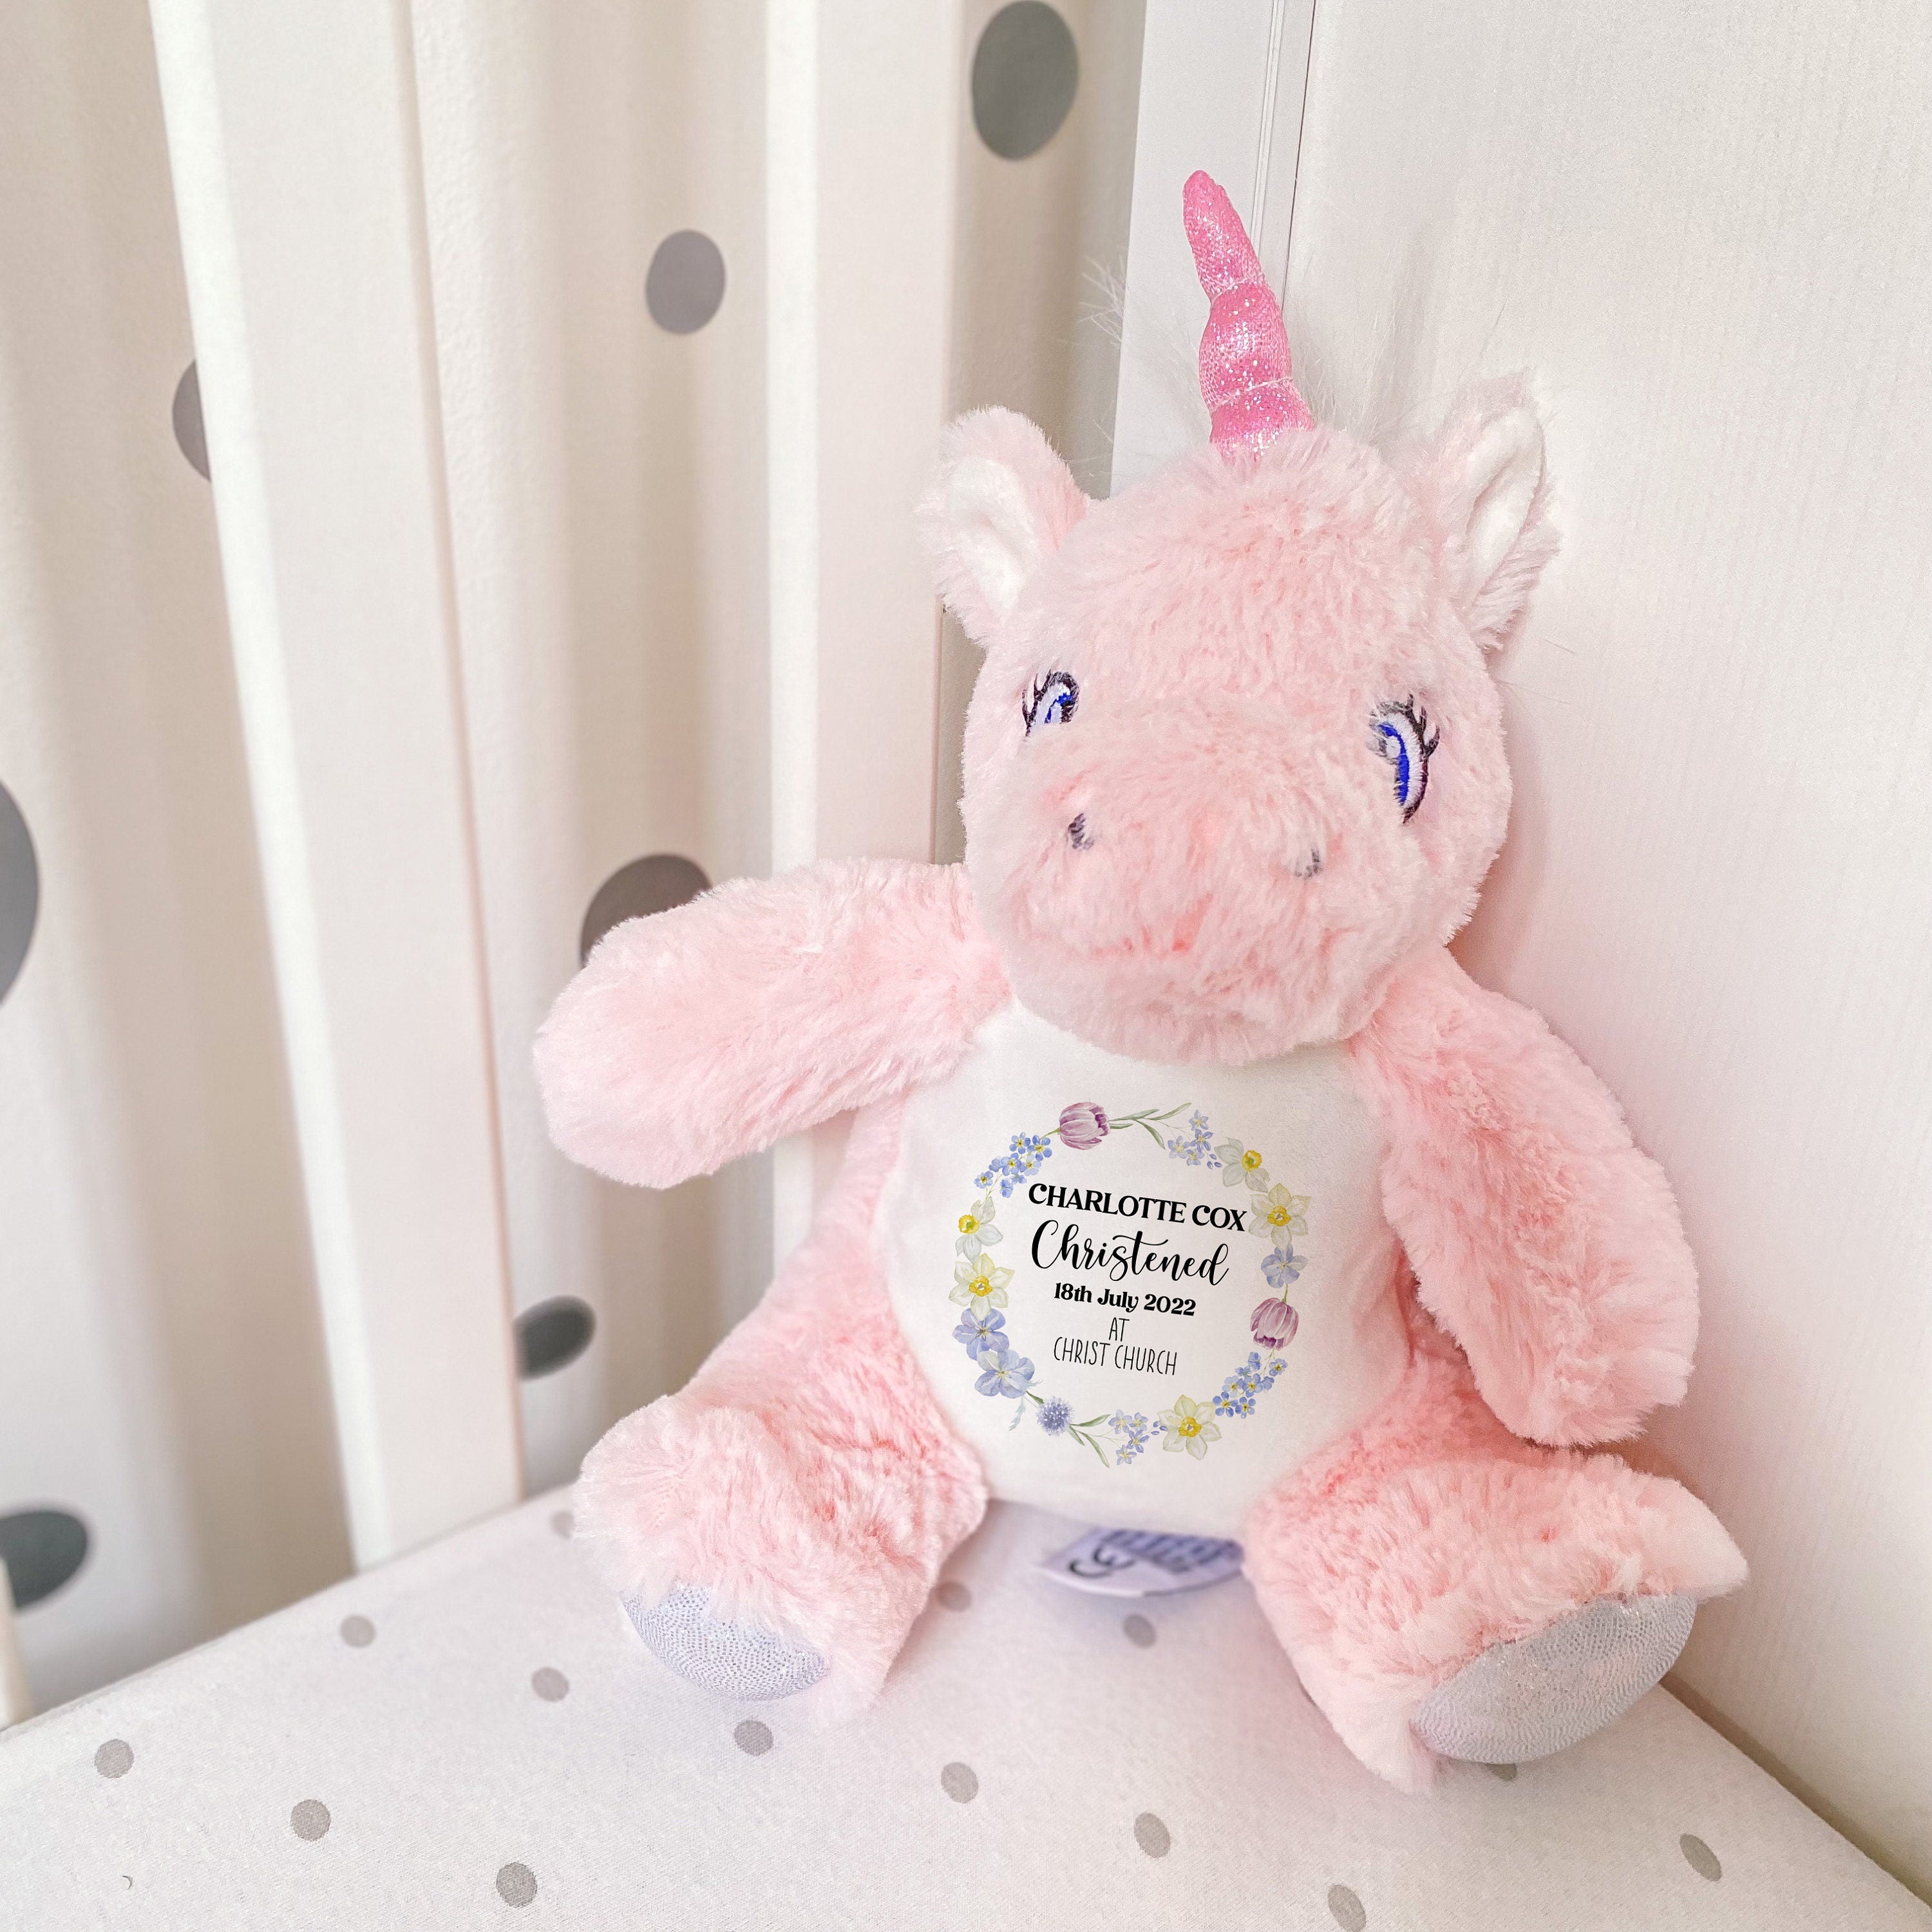 Personalised Christening Gift With Name And Church, Plush Toy, Baptism Bunny, Baby Girl Boy Gifts, Baby Keepsake Teddy